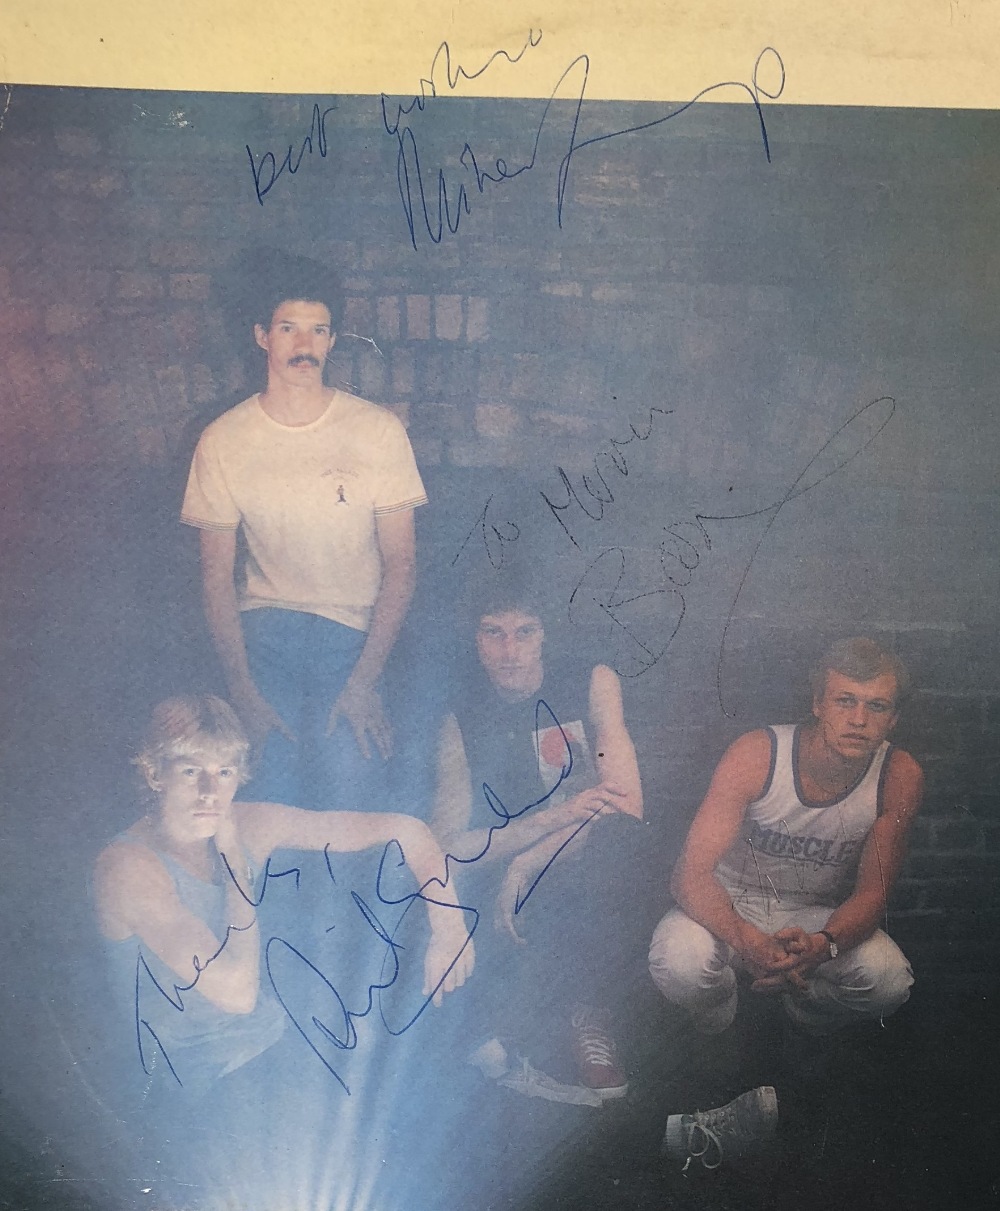 LEVEL 42 SIGNED. Six records signed by members of Level 42. - Image 4 of 7